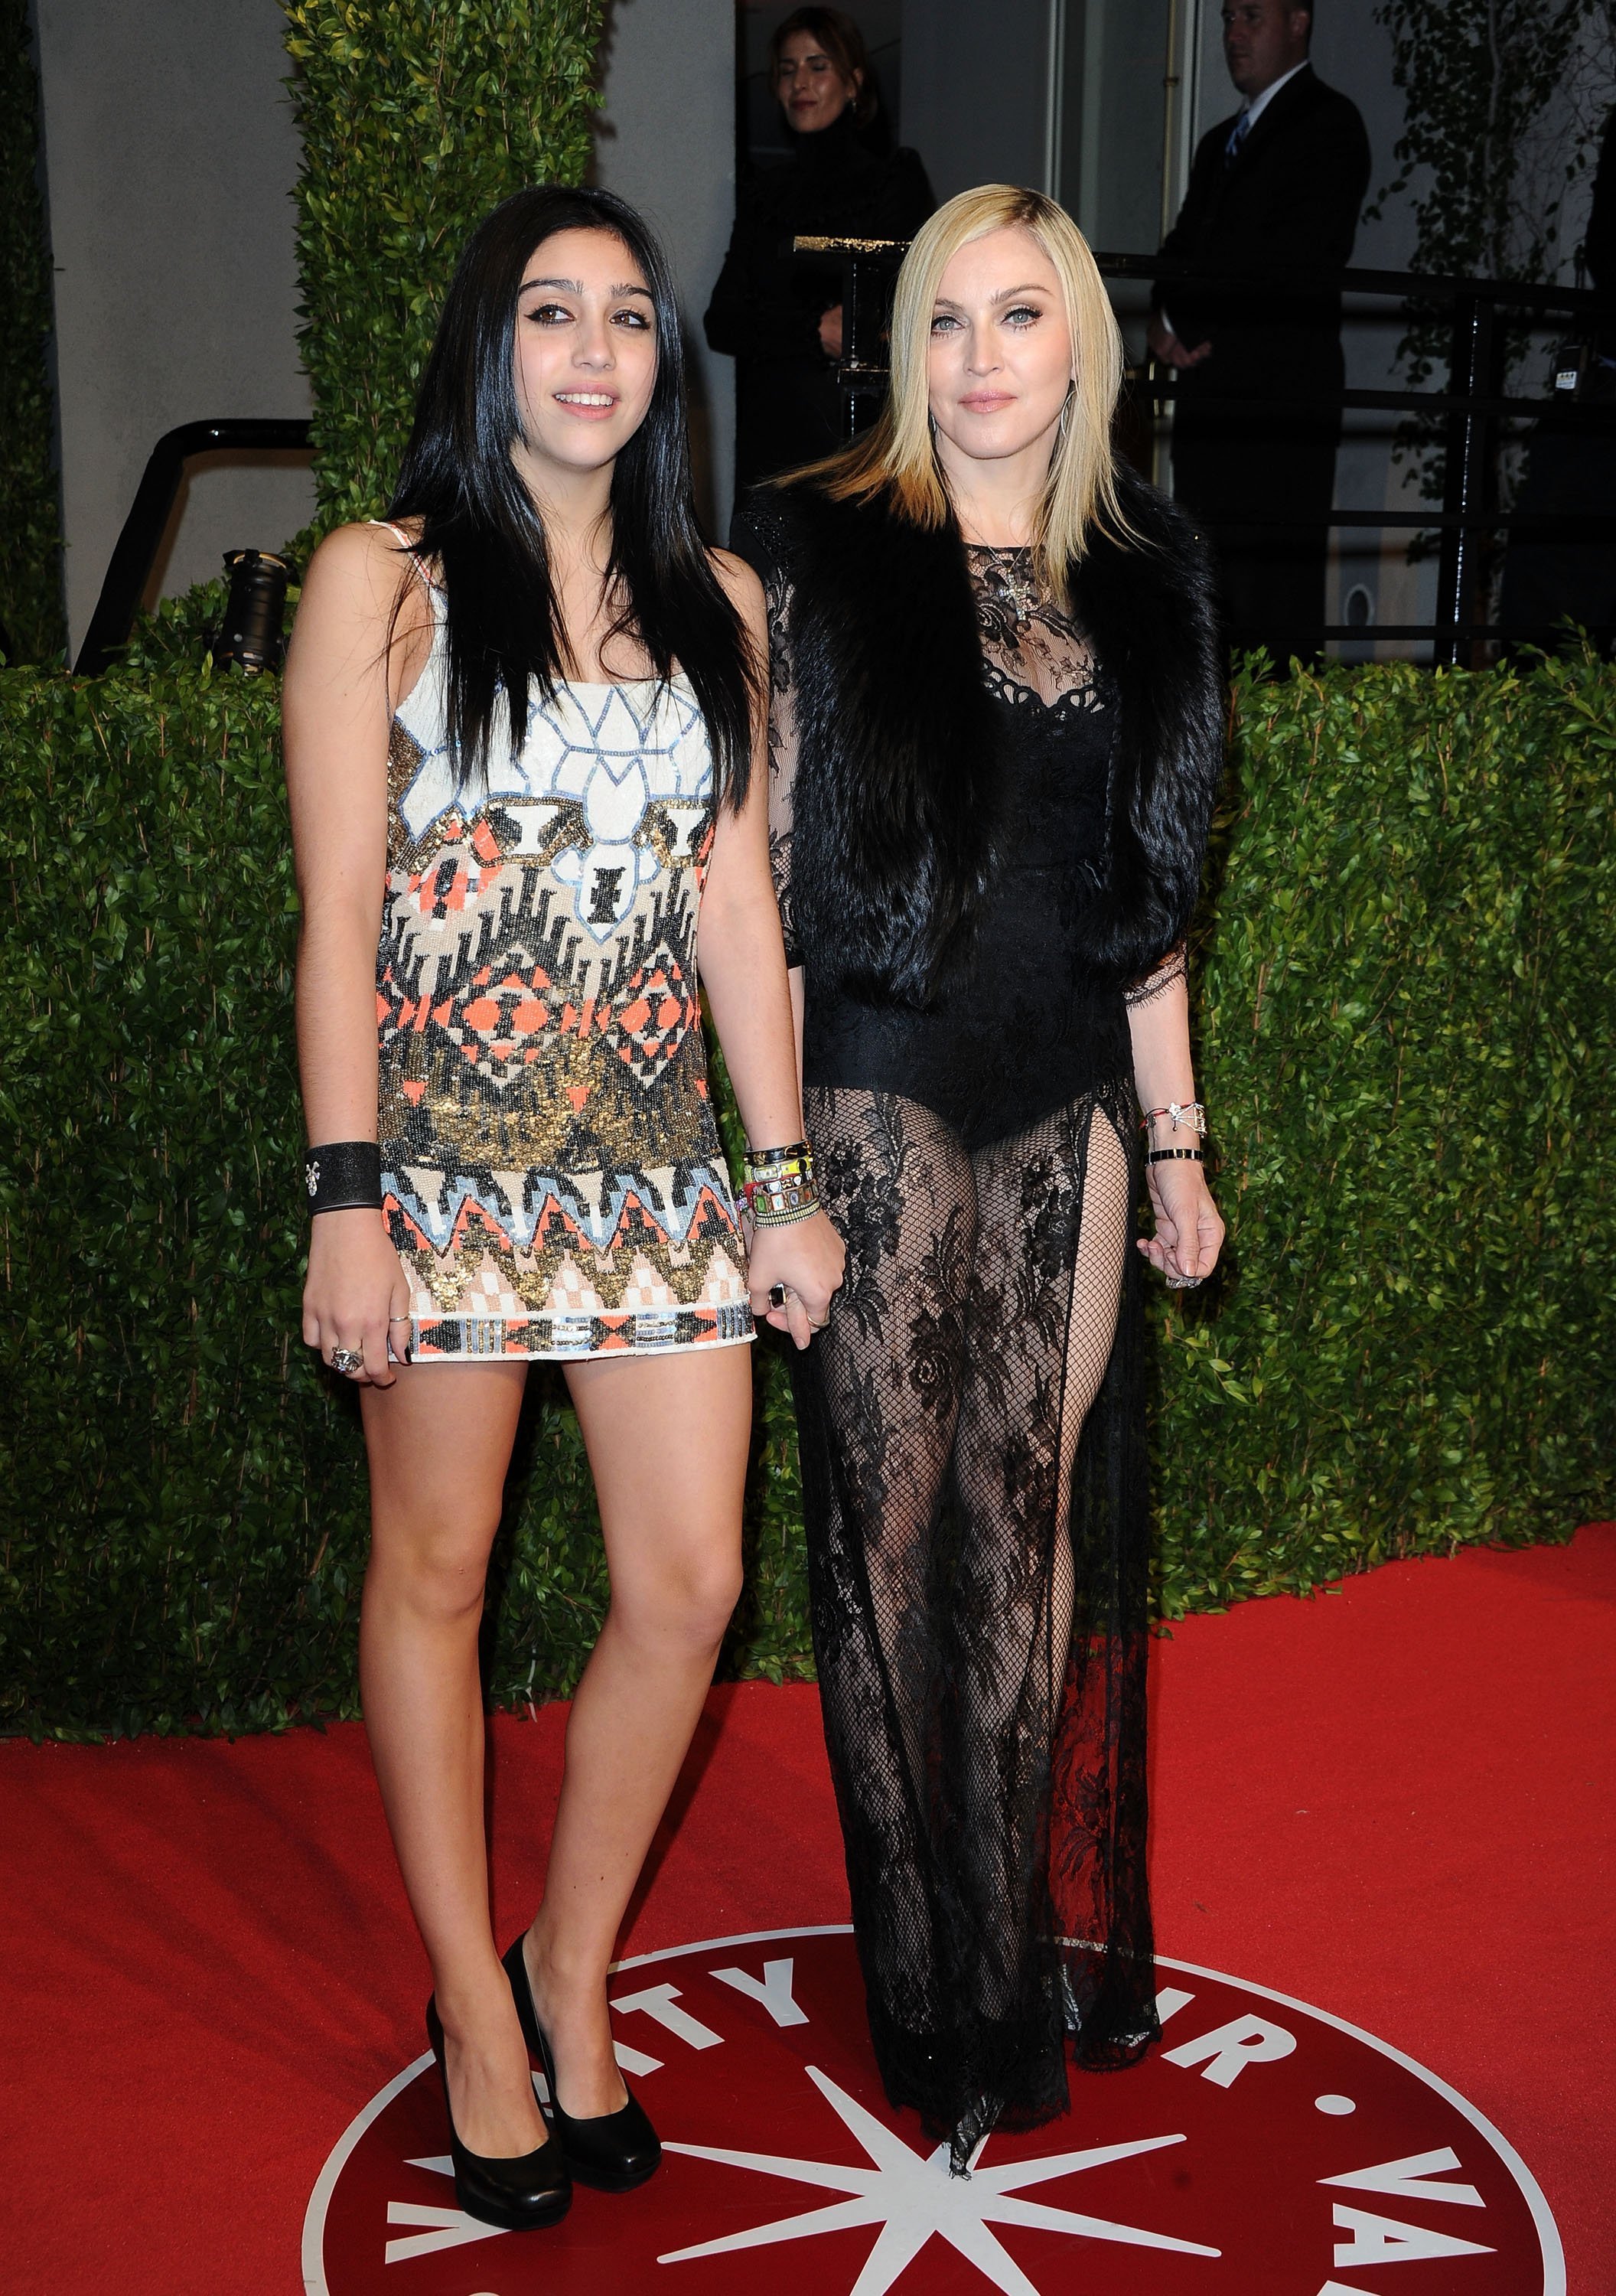 Lourdes Leon (L) and Madonna arrive at the Vanity Fair Oscar party hosted by Graydon Carter held at Sunset Tower on February 27, 2011, in West Hollywood, California. | Photo: Getty Images.